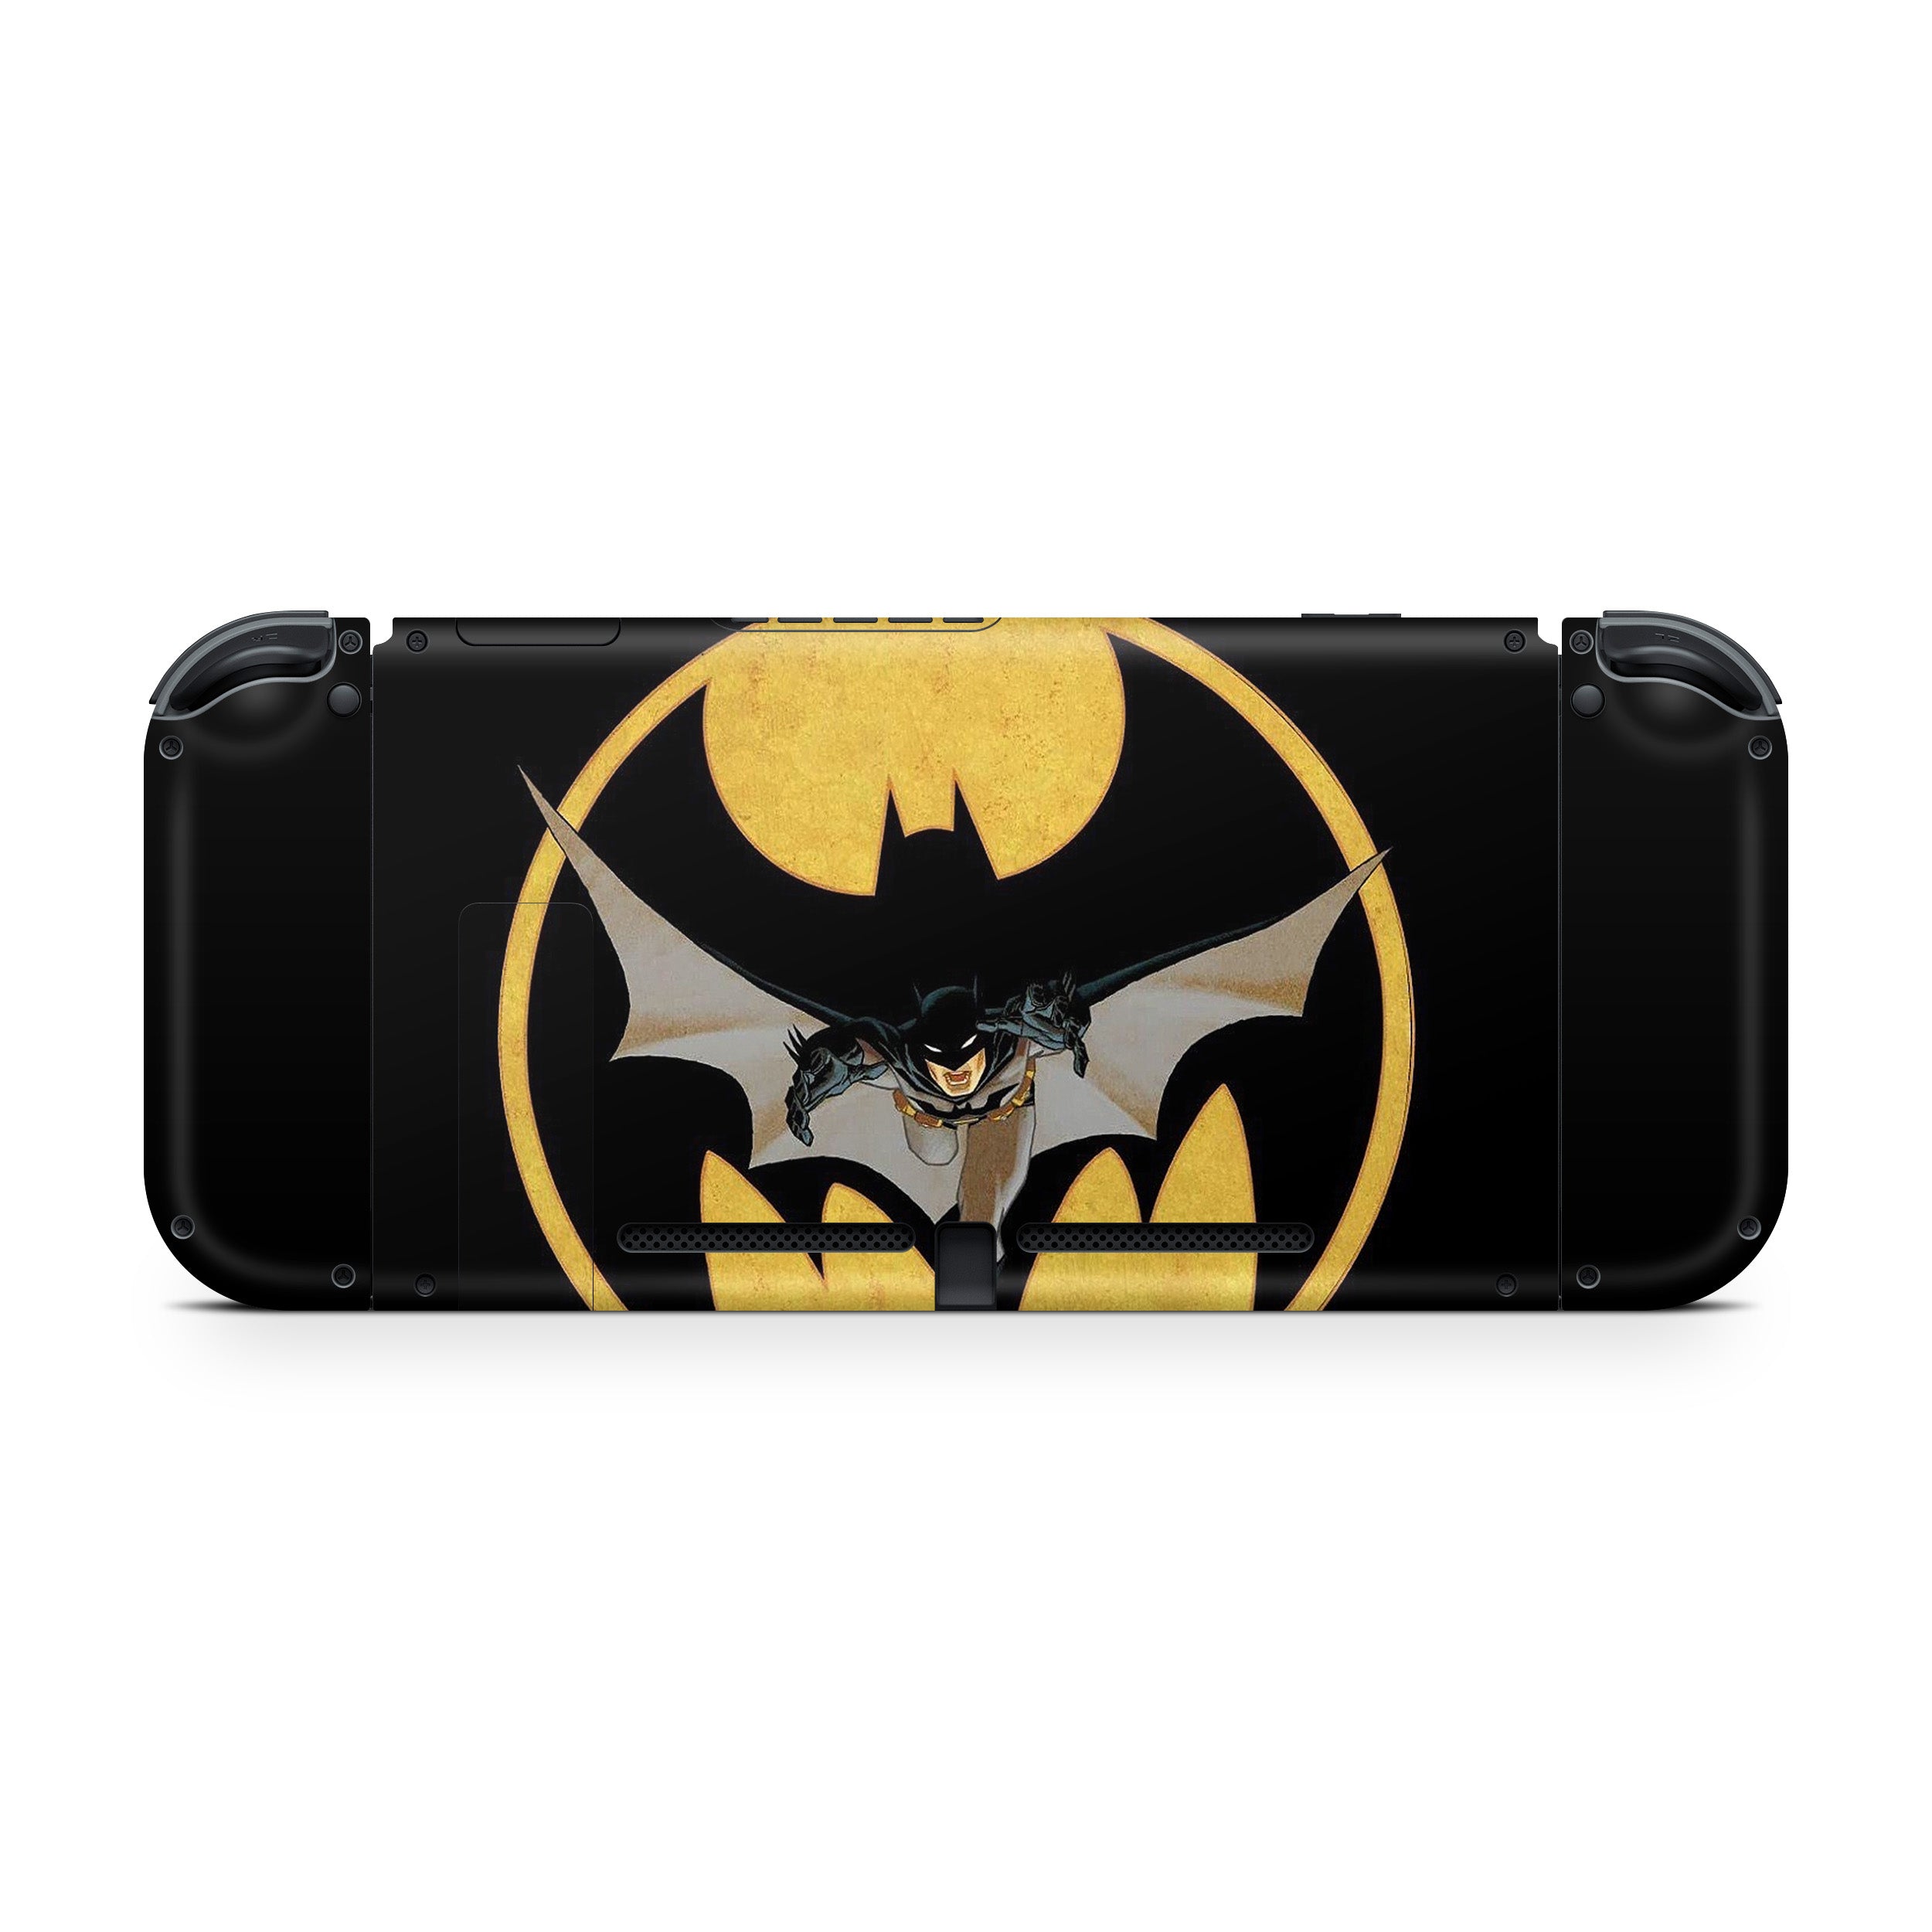 A video game skin featuring a DC Batman design for the Nintendo Switch.